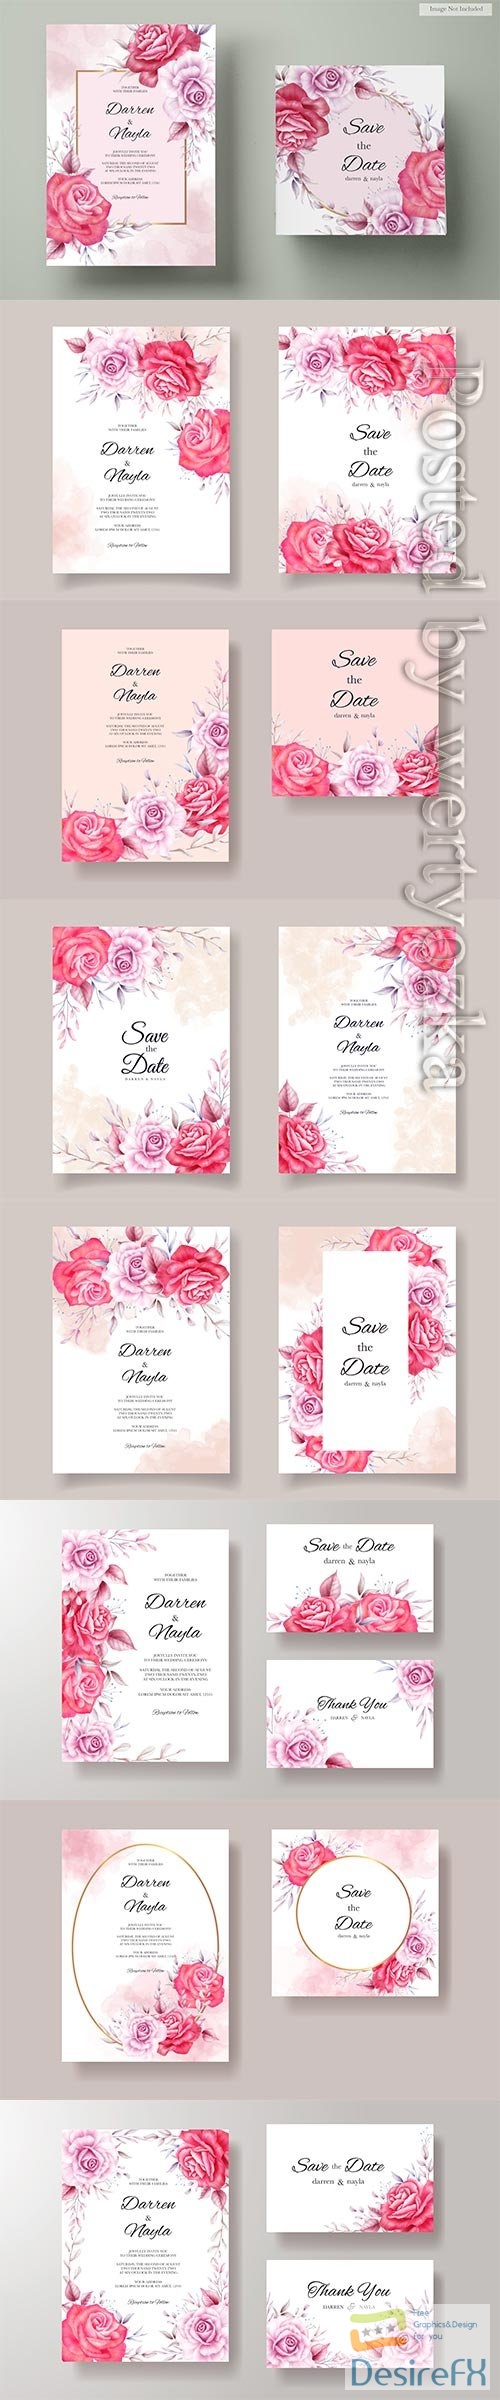 Download Beautiful wedding invitation with red and purple roses ...